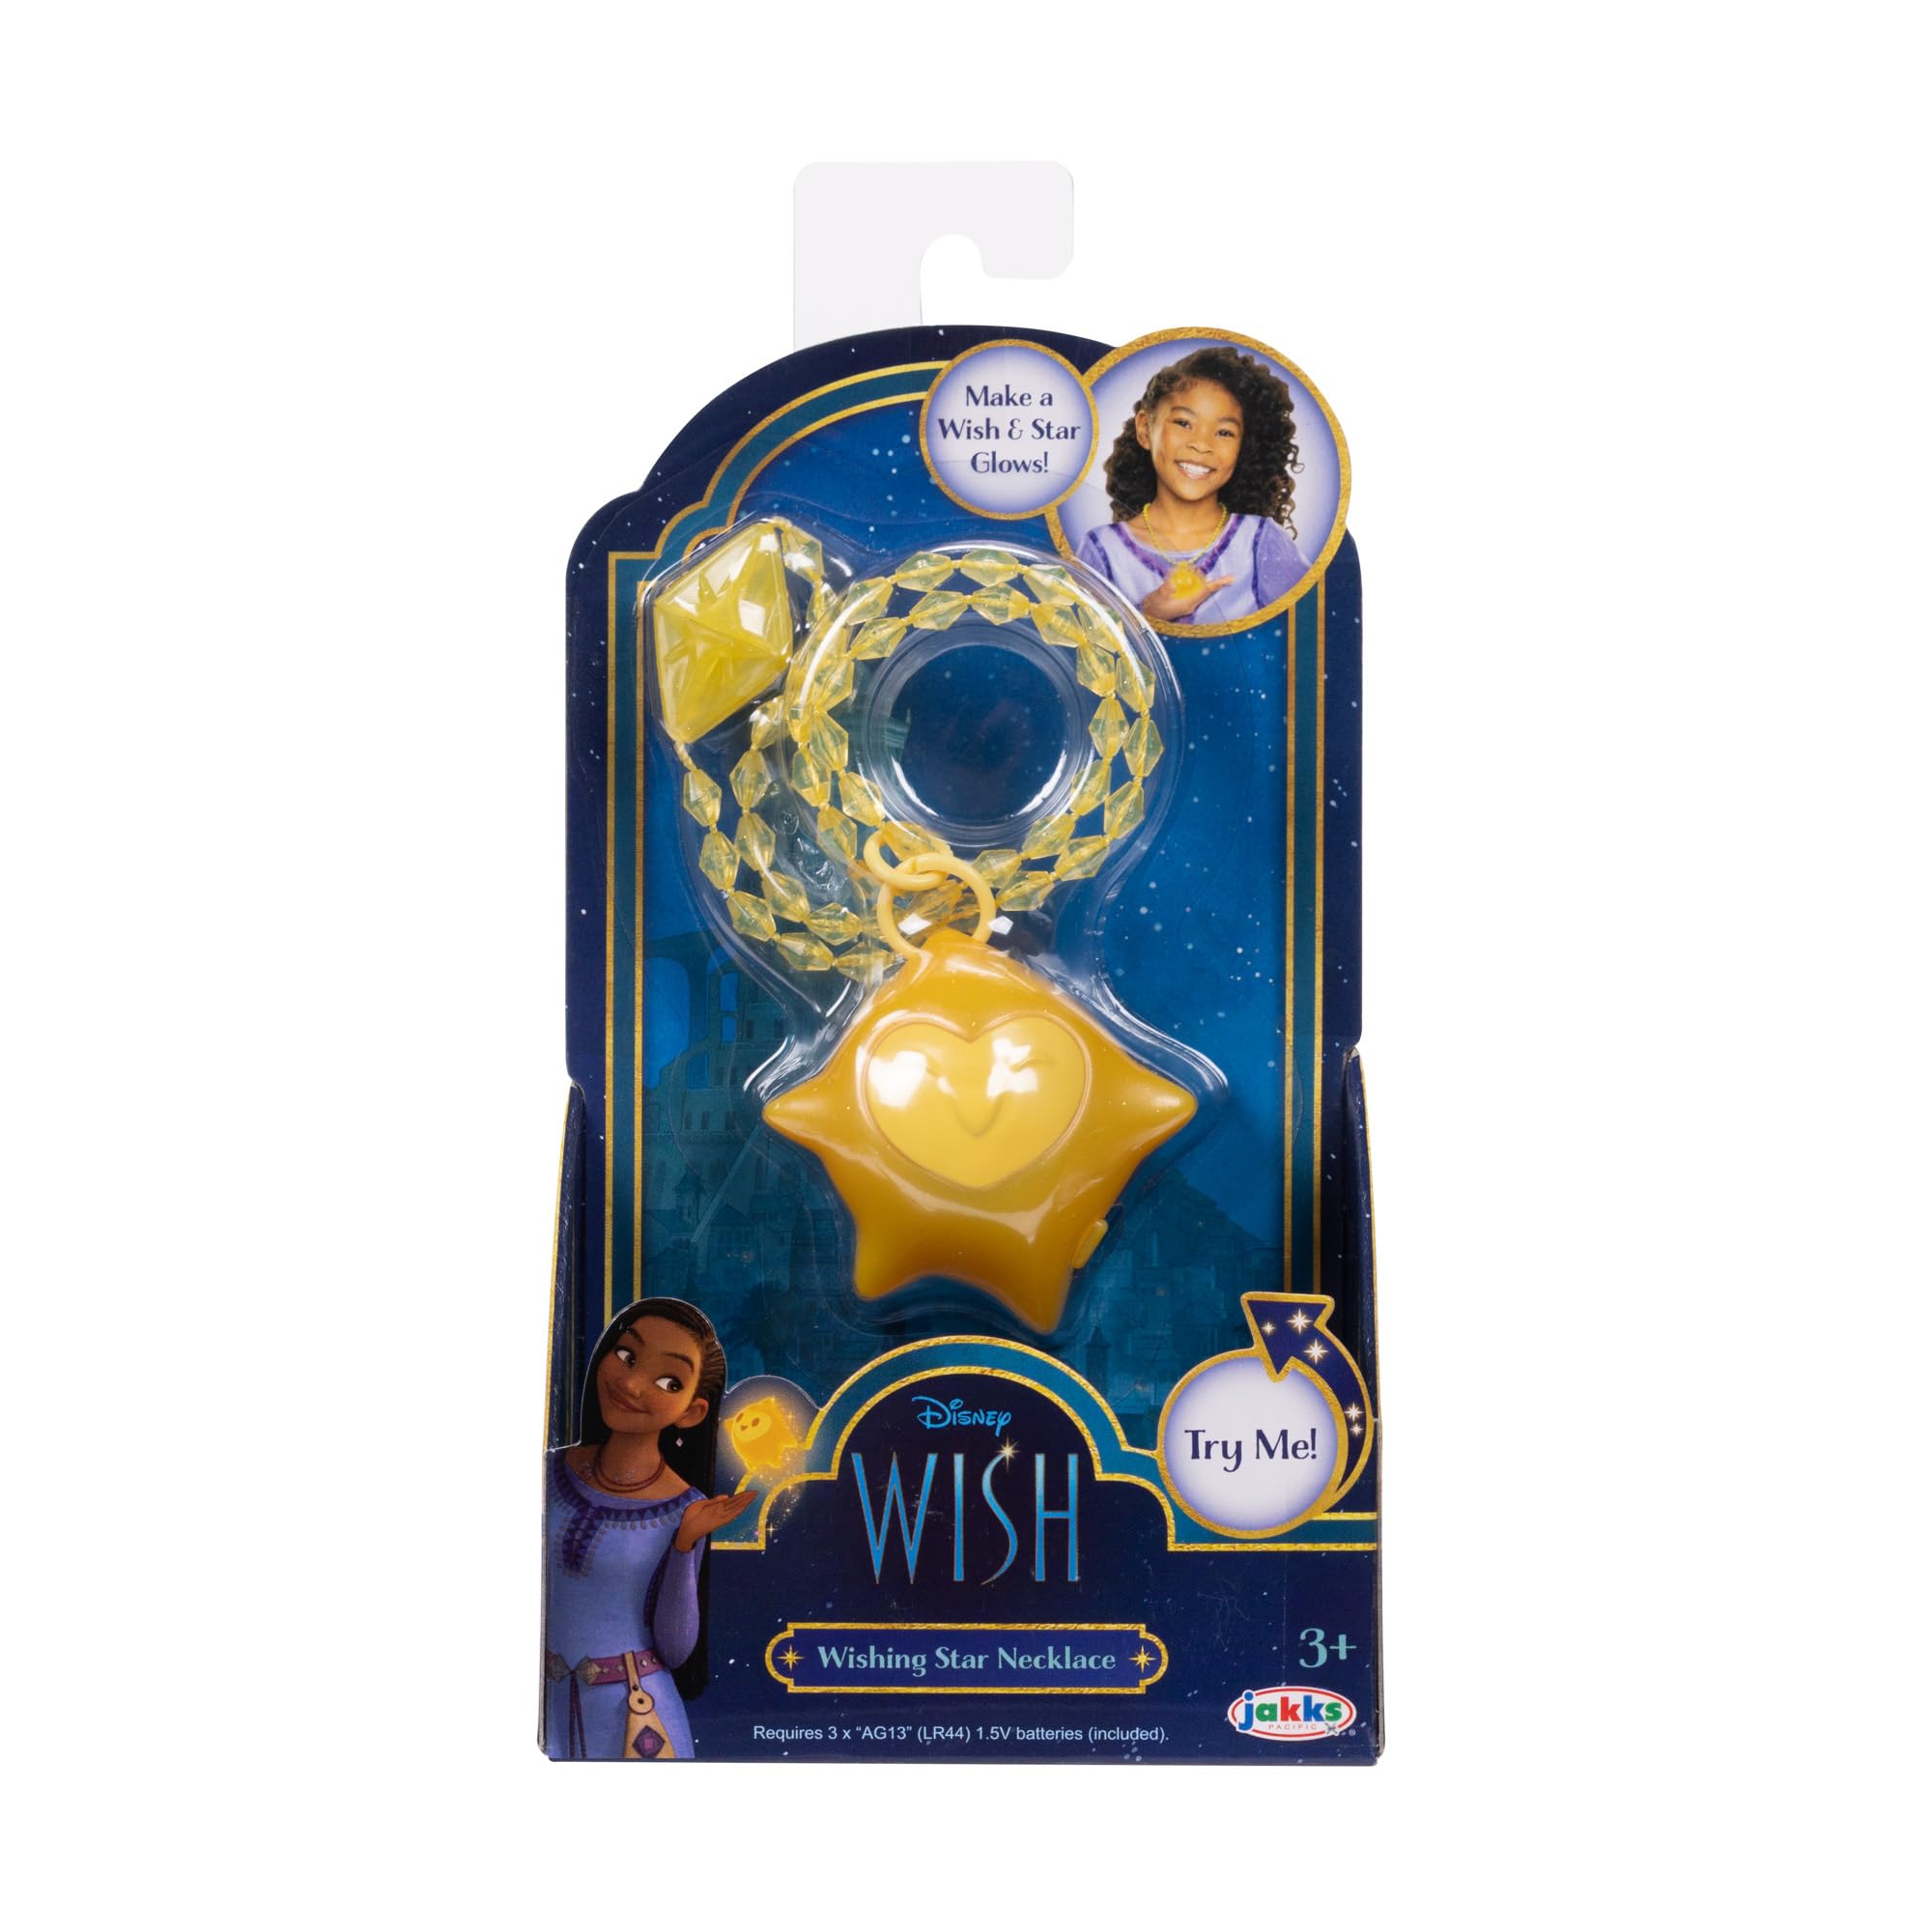 Disney's Wish Wishing Star Necklace with Light Up Feature